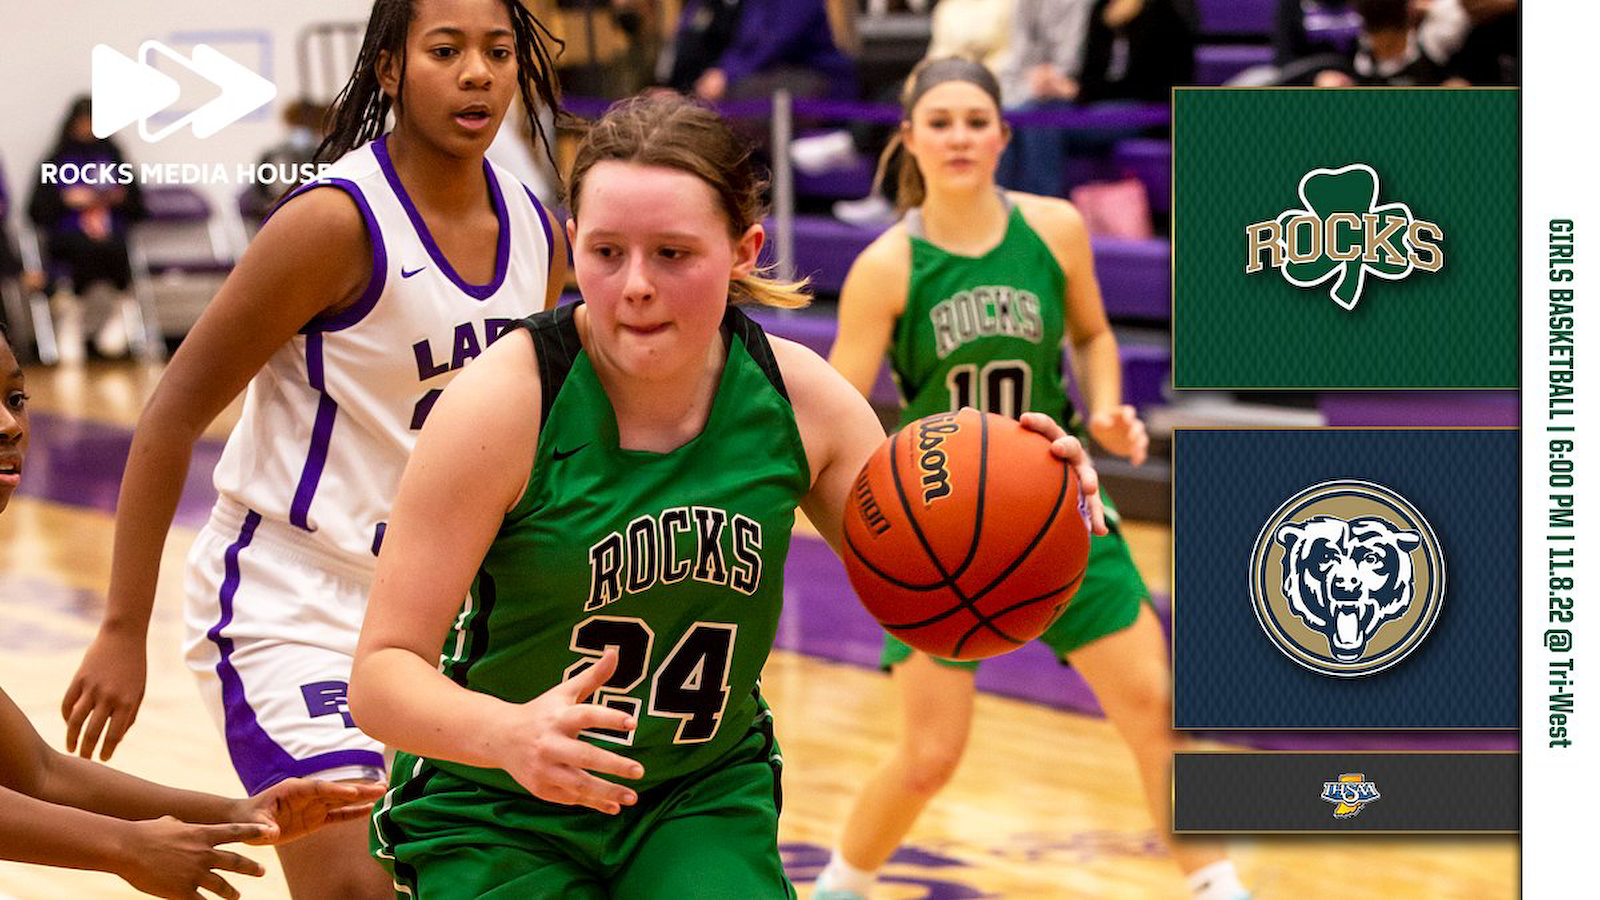 Lady Rocks Defeat Bruins 55-15 cover photo